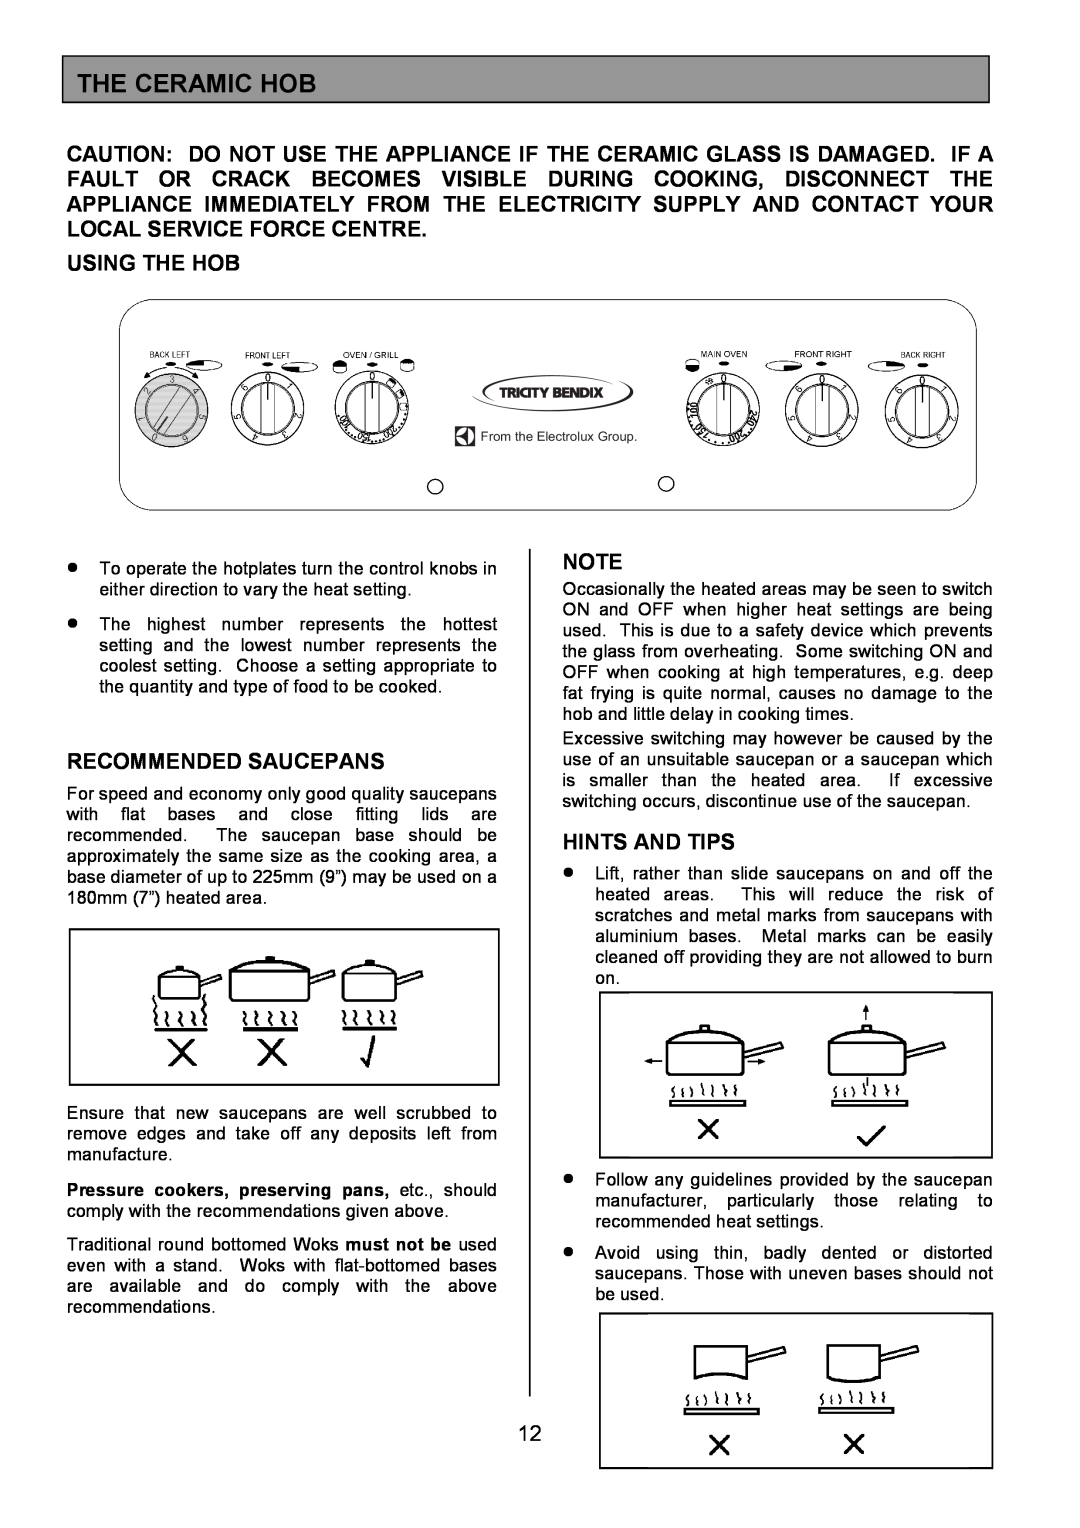 Tricity Bendix SE550 installation instructions The Ceramic Hob, Using The Hob, Recommended Saucepans, Hints And Tips 